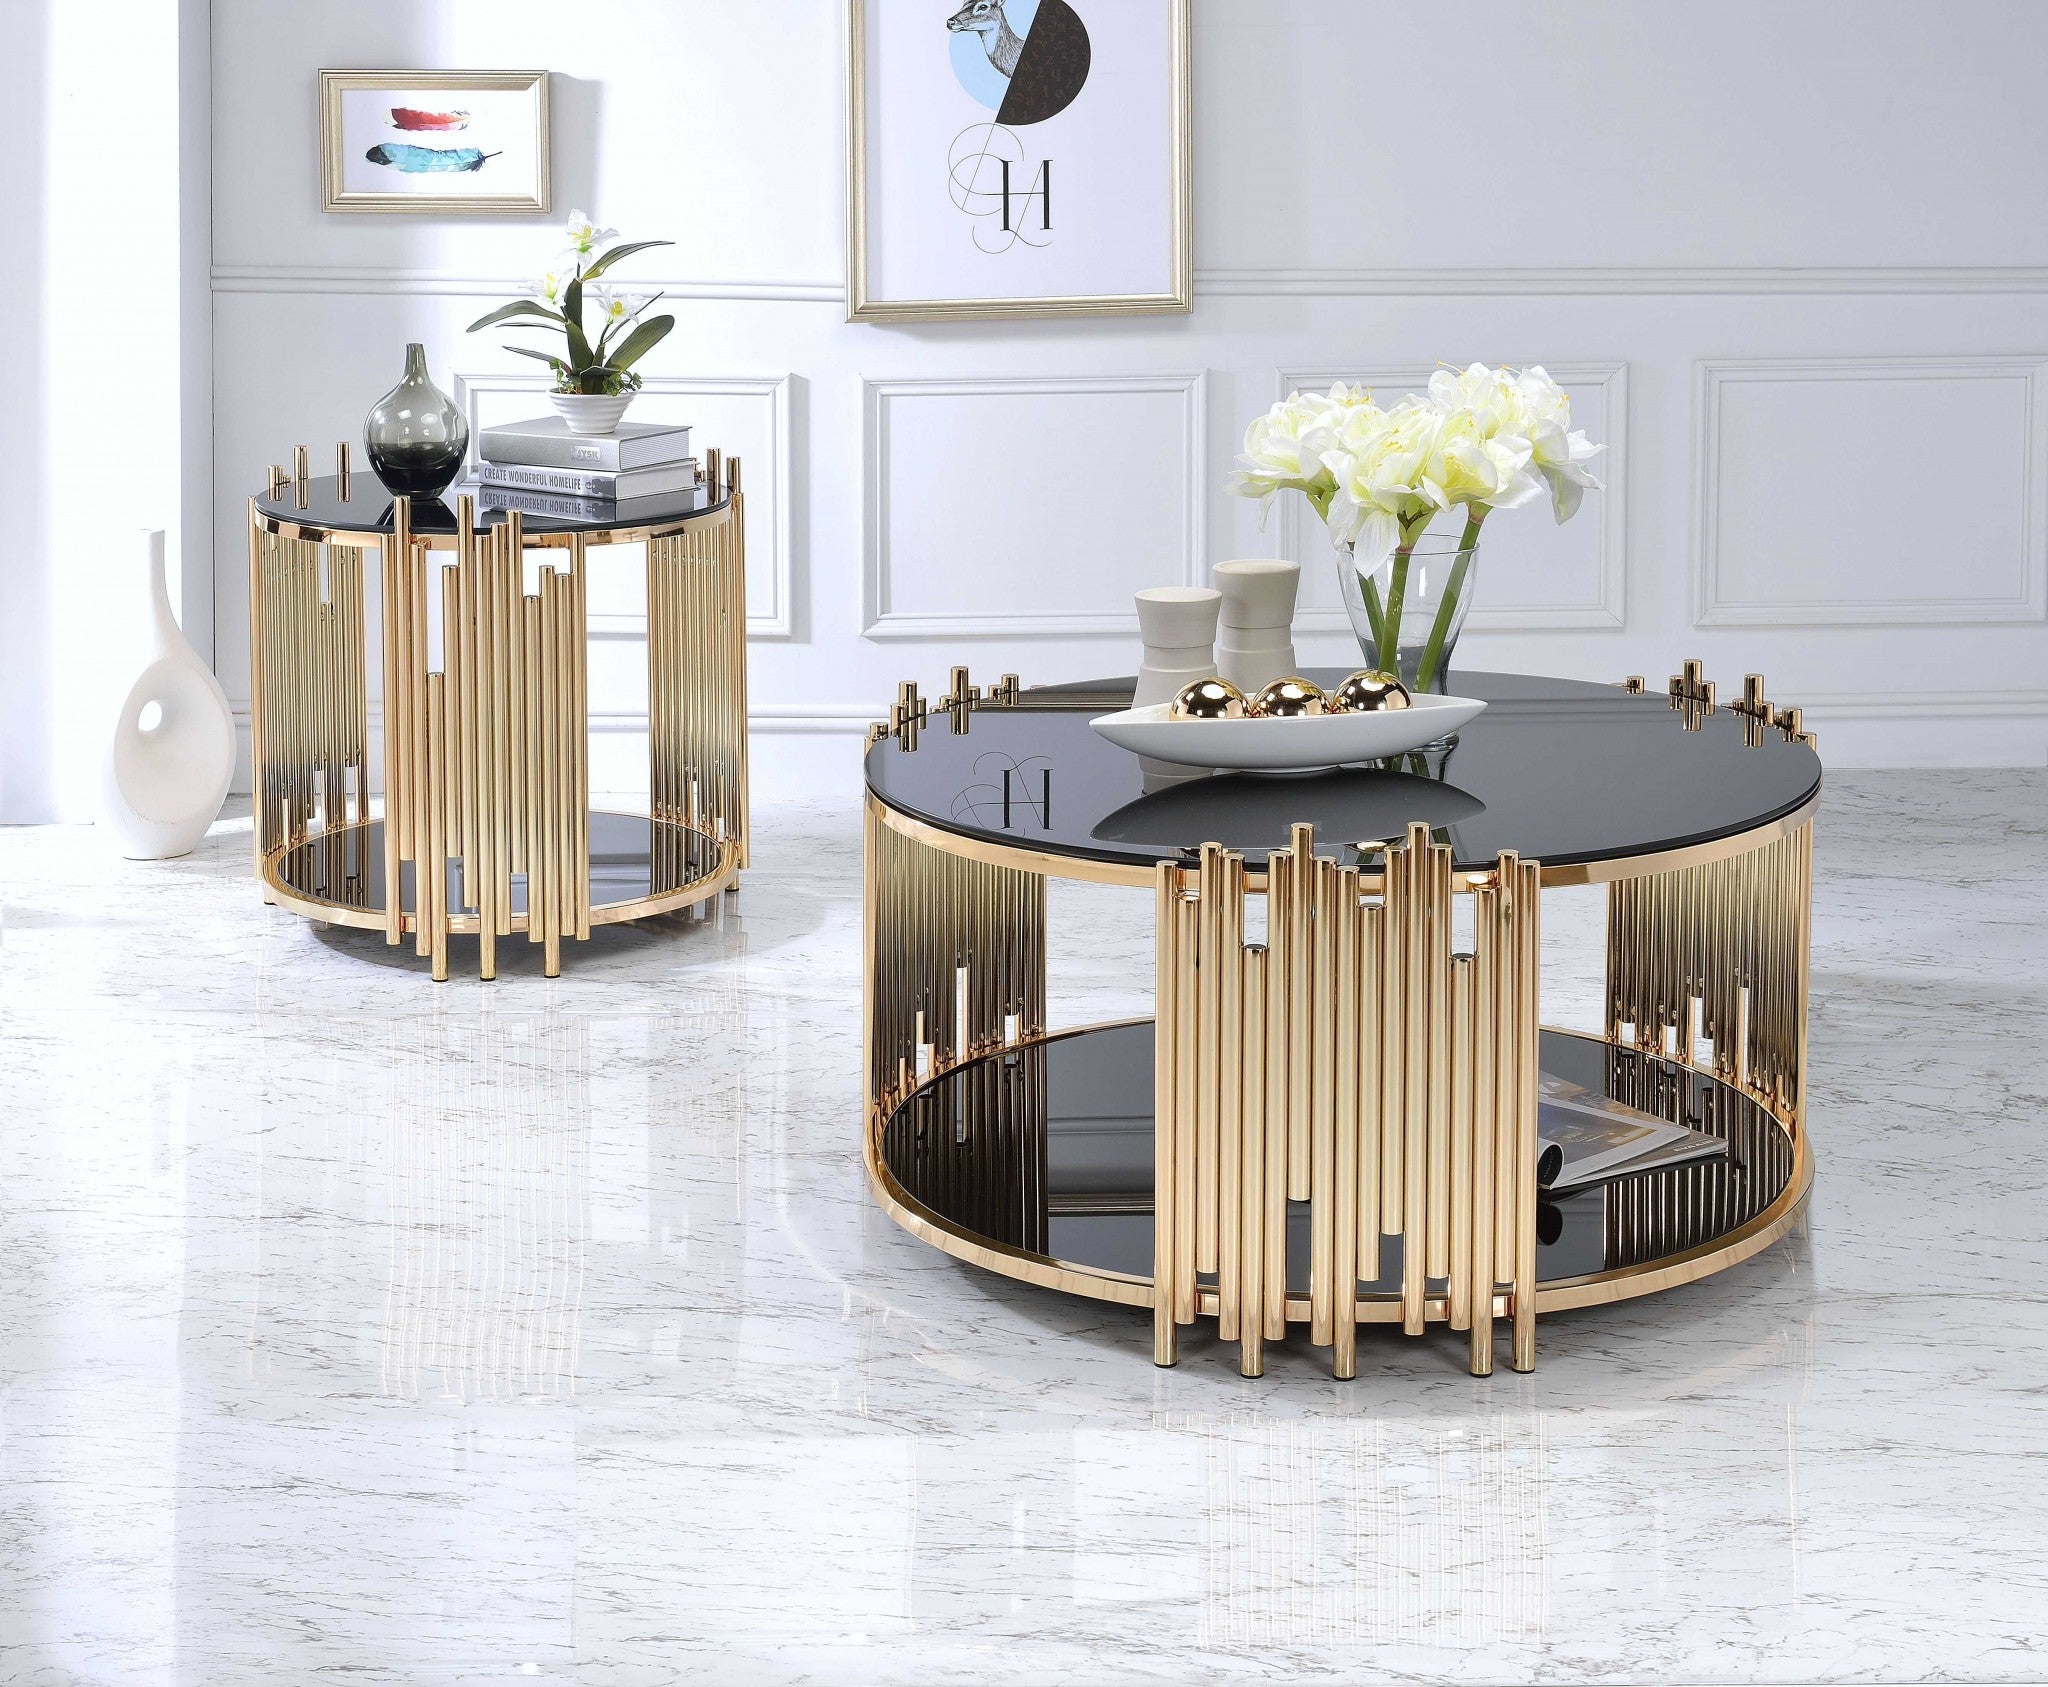 22" Gold And Black Glass Round End Table With Shelf